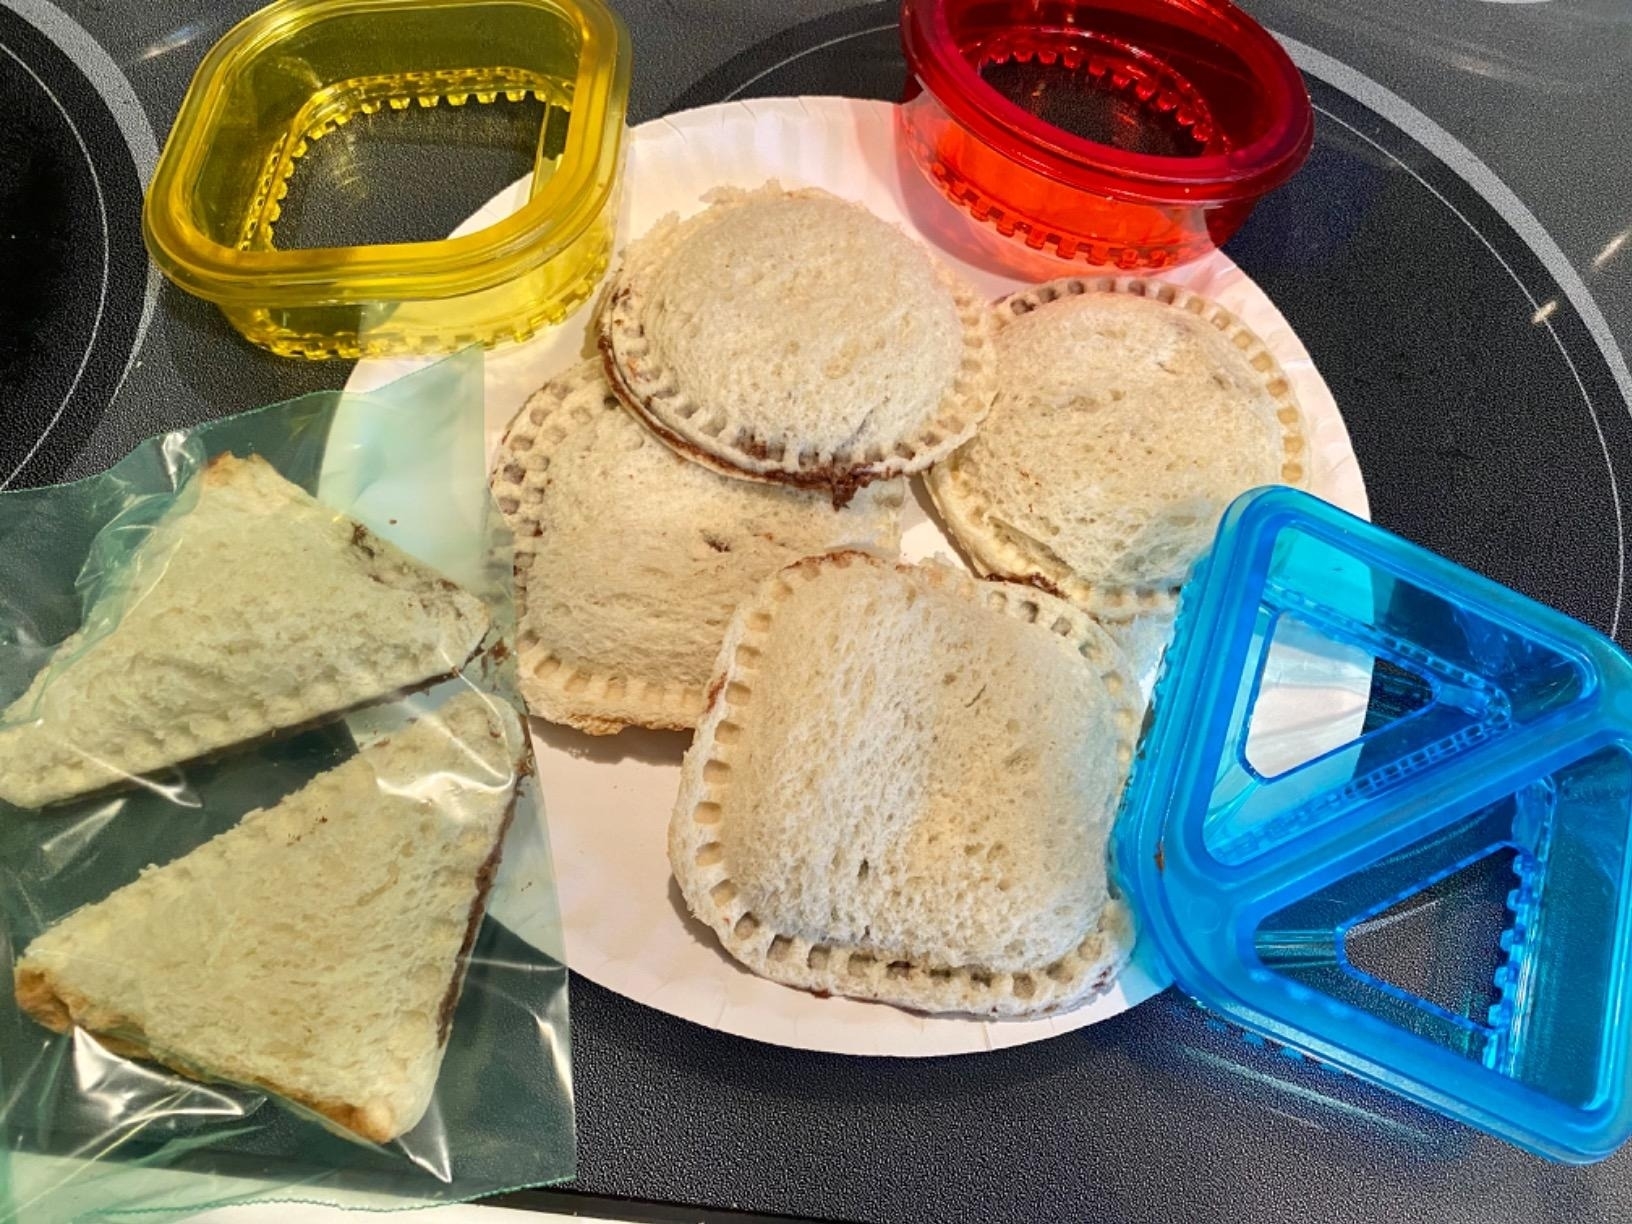 the cut sandwiches on a plate next to the different shaped cutters